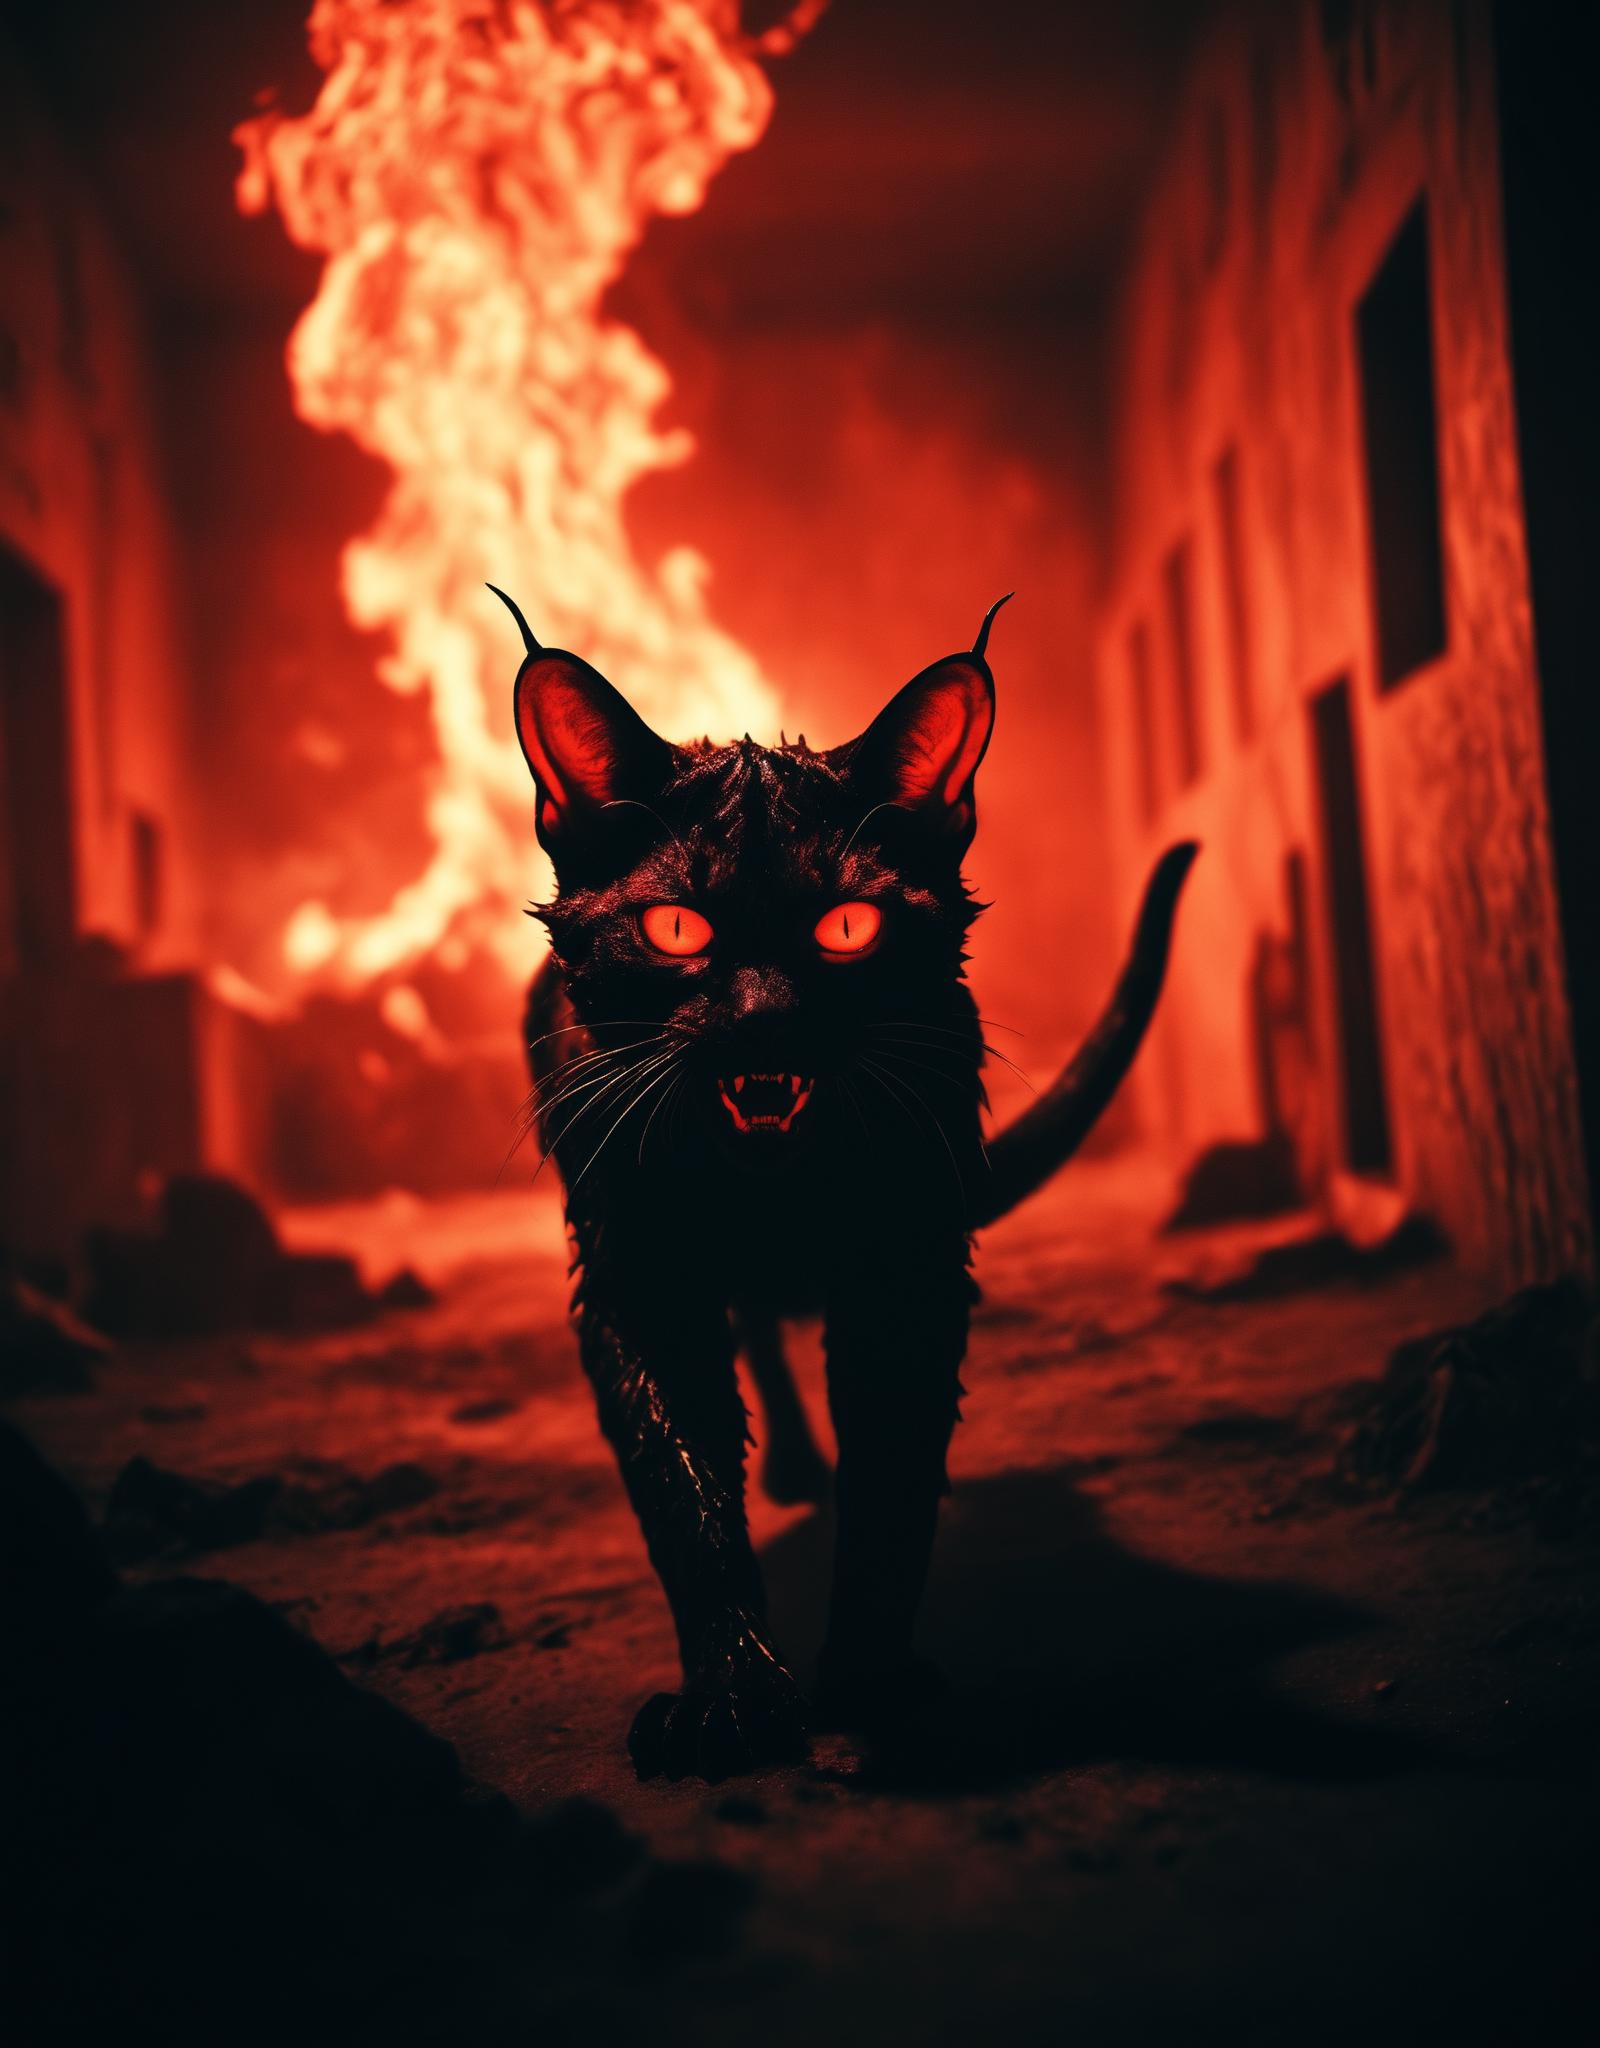 A cat with glowing eyes walking down a hallway.